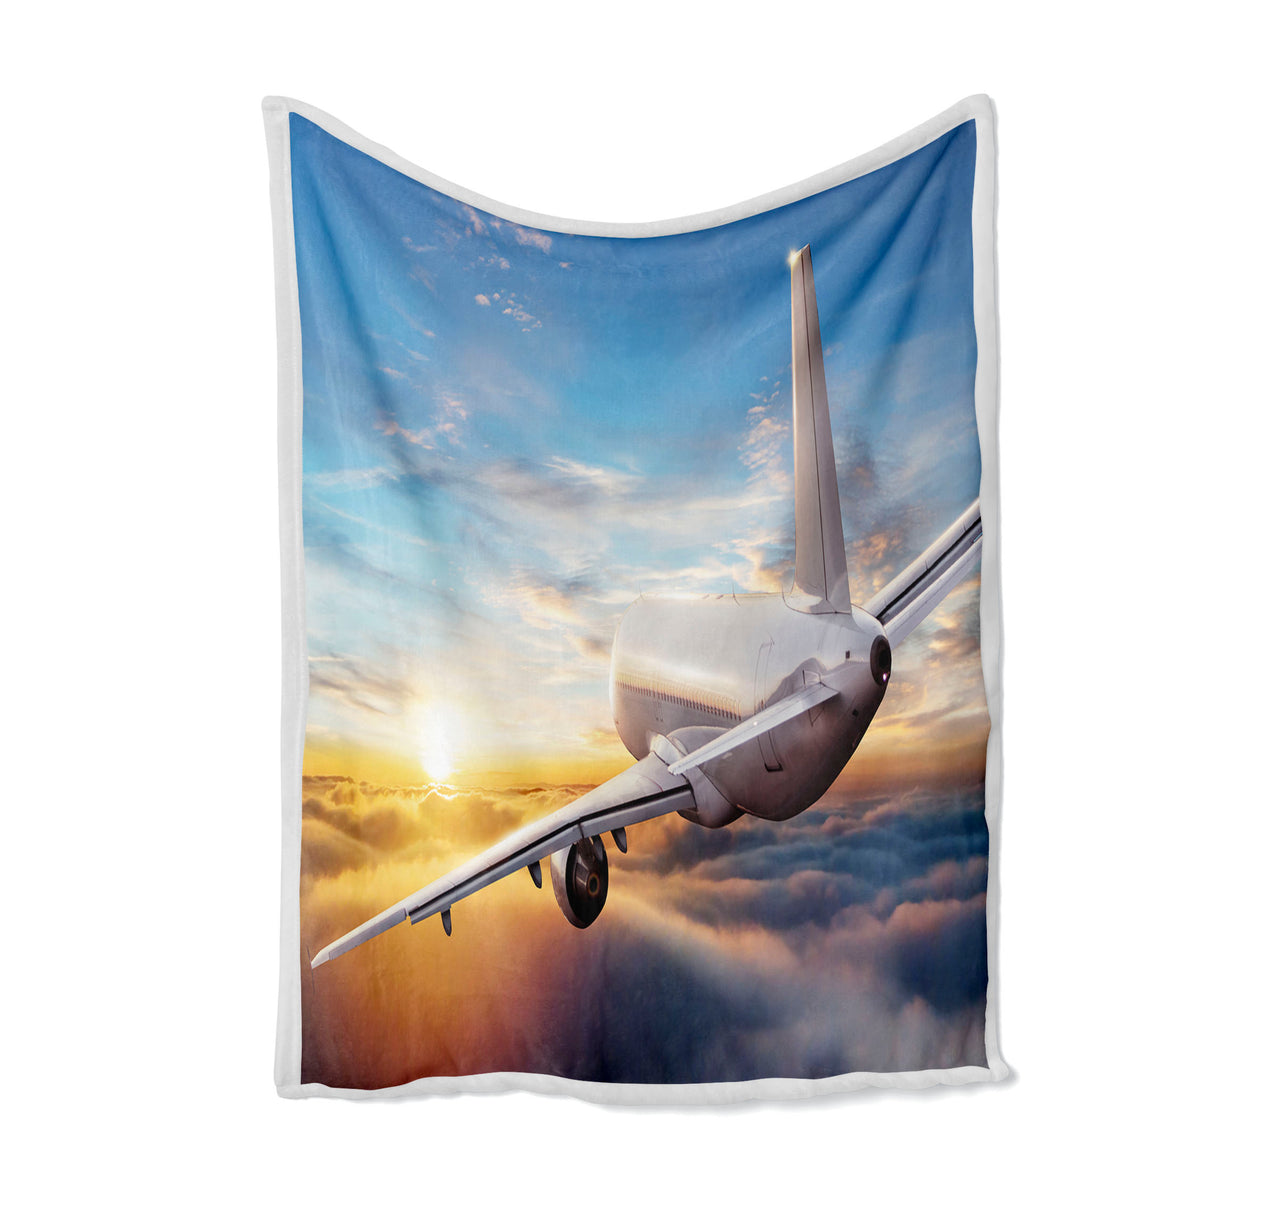 Airliner Jet Cruising over Clouds Designed Bed Blankets & Covers